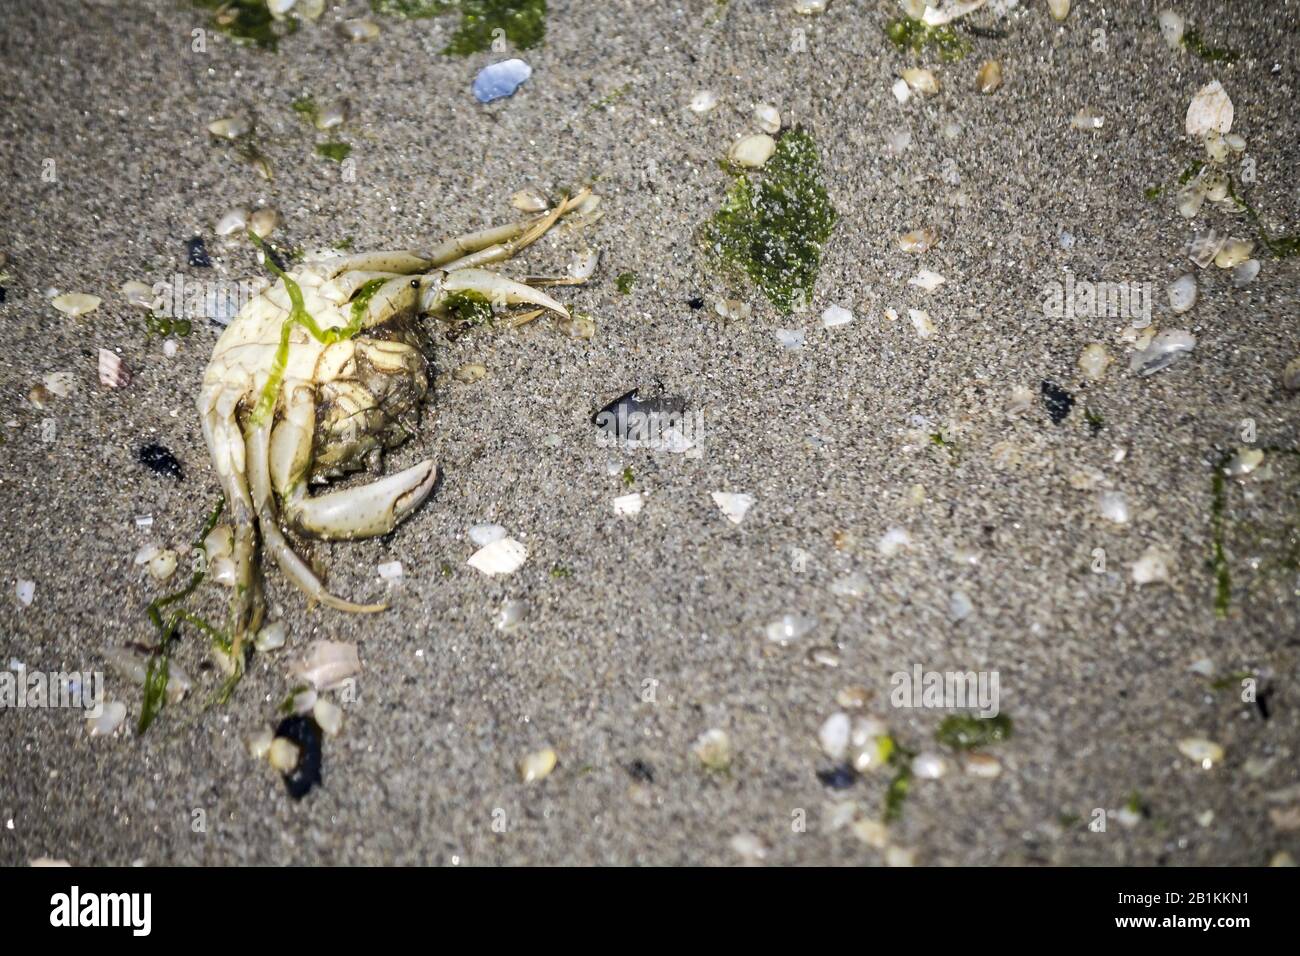 dead crab upside down on the beach Stock Photo